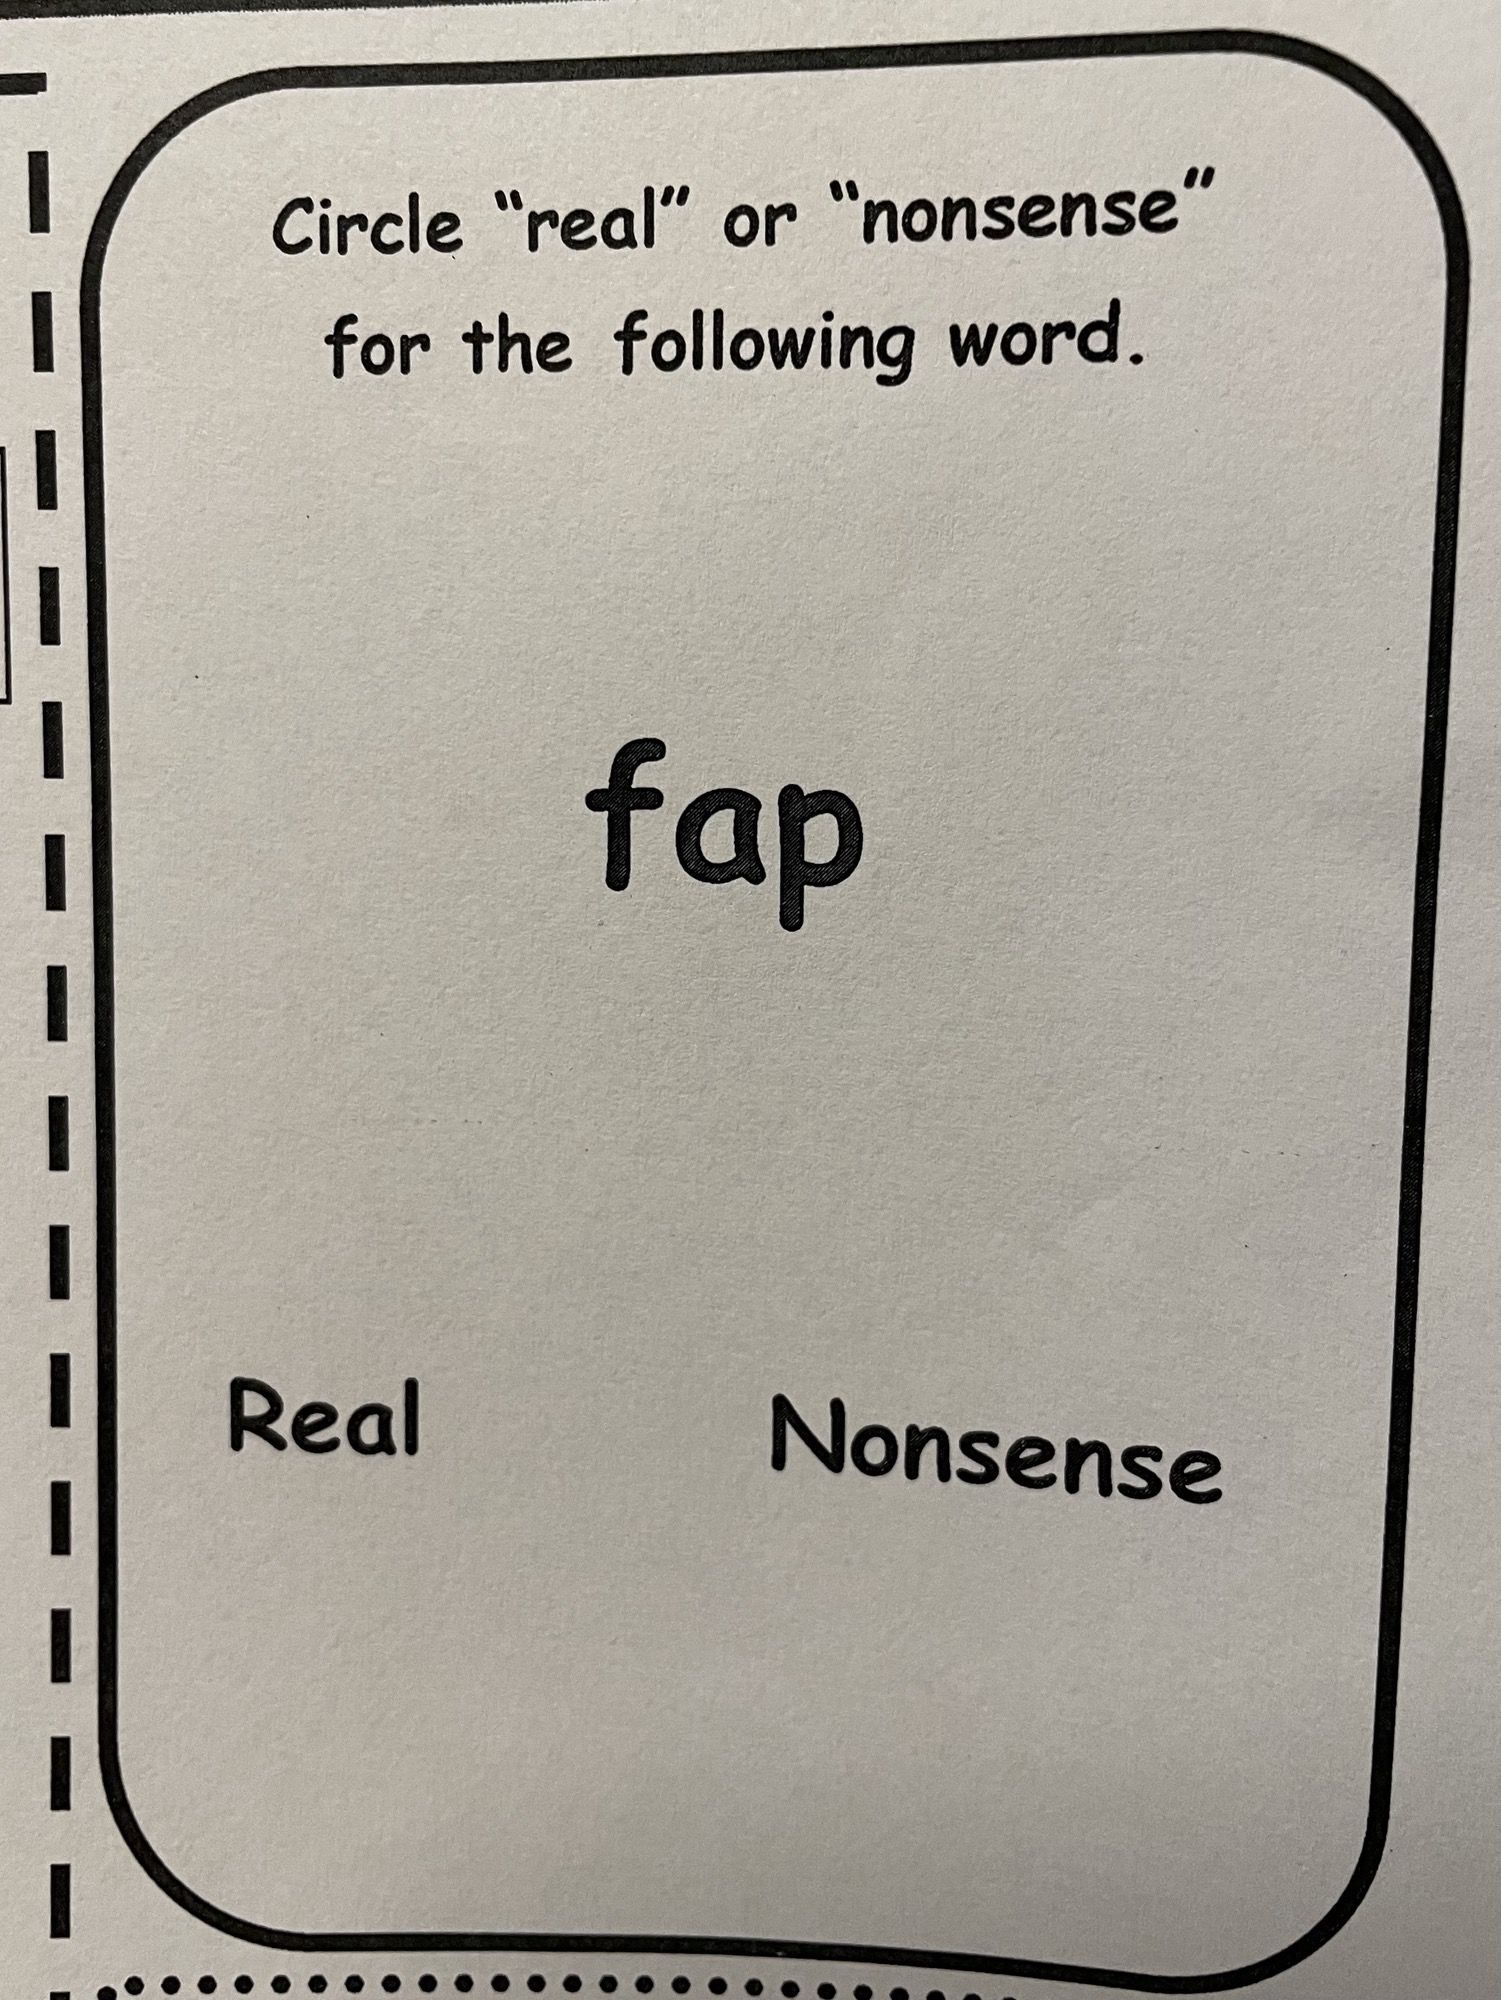 Question on my first grader’s take-home worksheet from today.